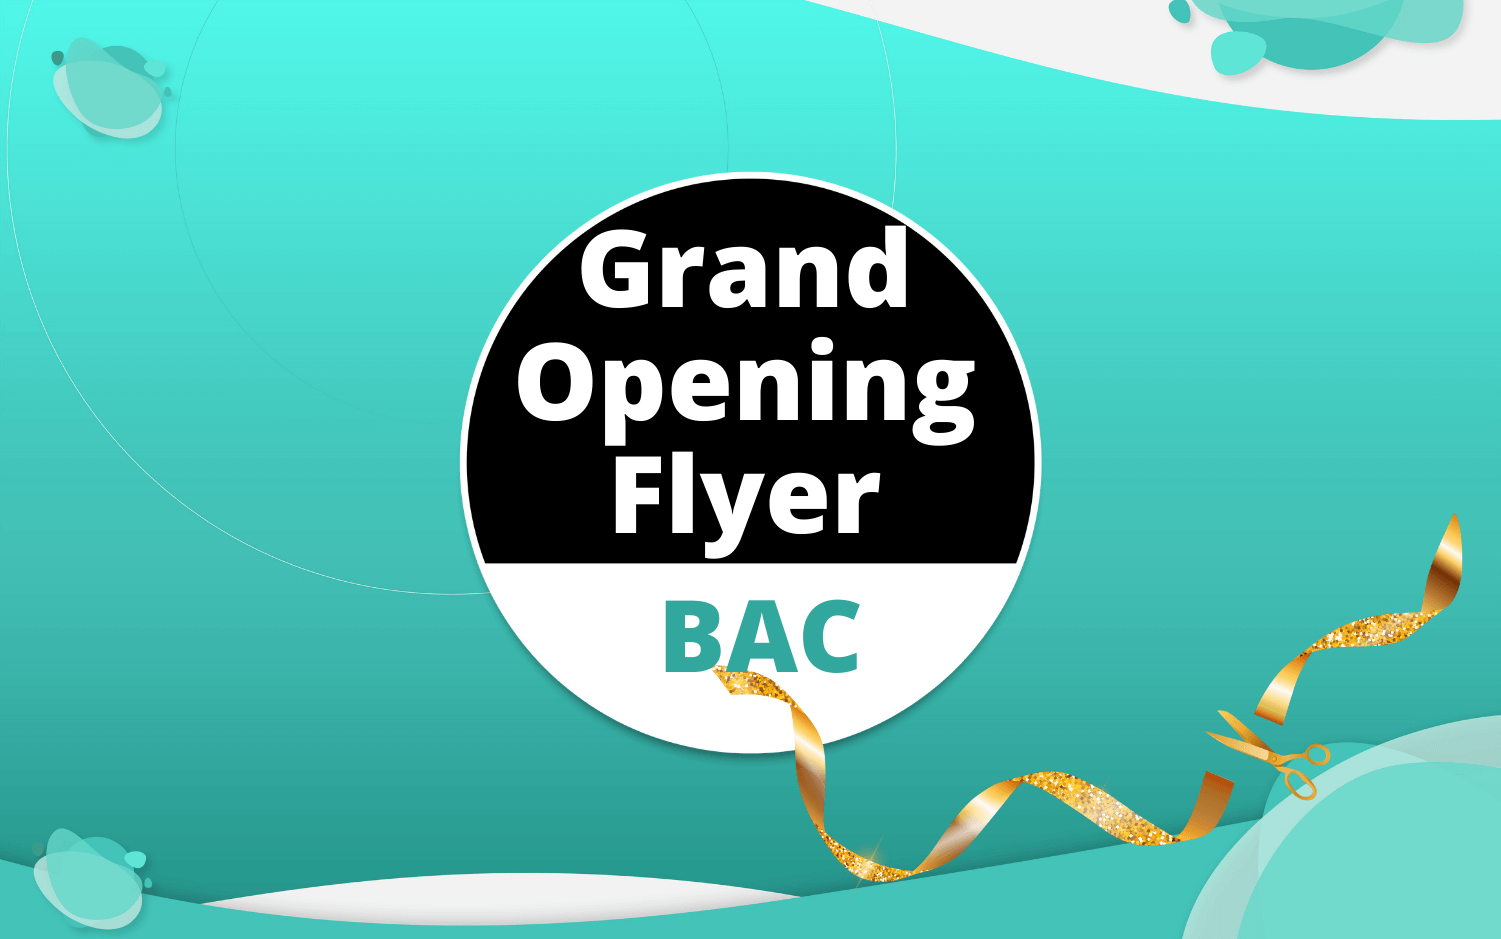 BAC Grand Opening Flyer